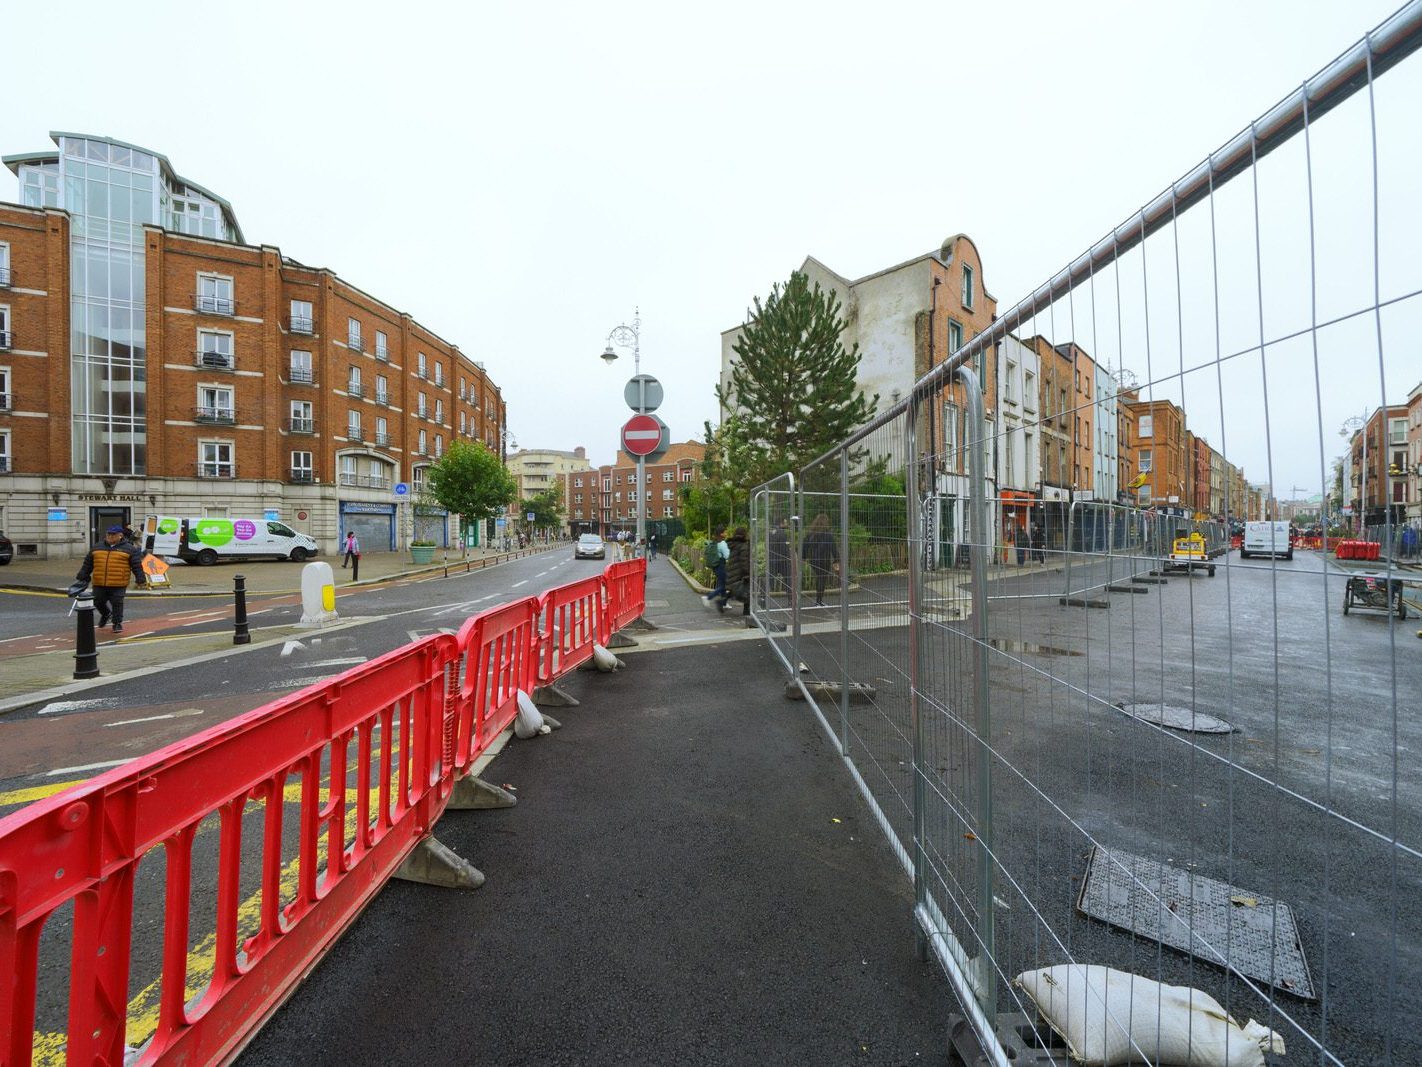 CAPEL STREET ON A DULL WET DAY [INTERIM CAPEL STREET IMPROVEMENT WORKS ARE NOW ONGOING] 005